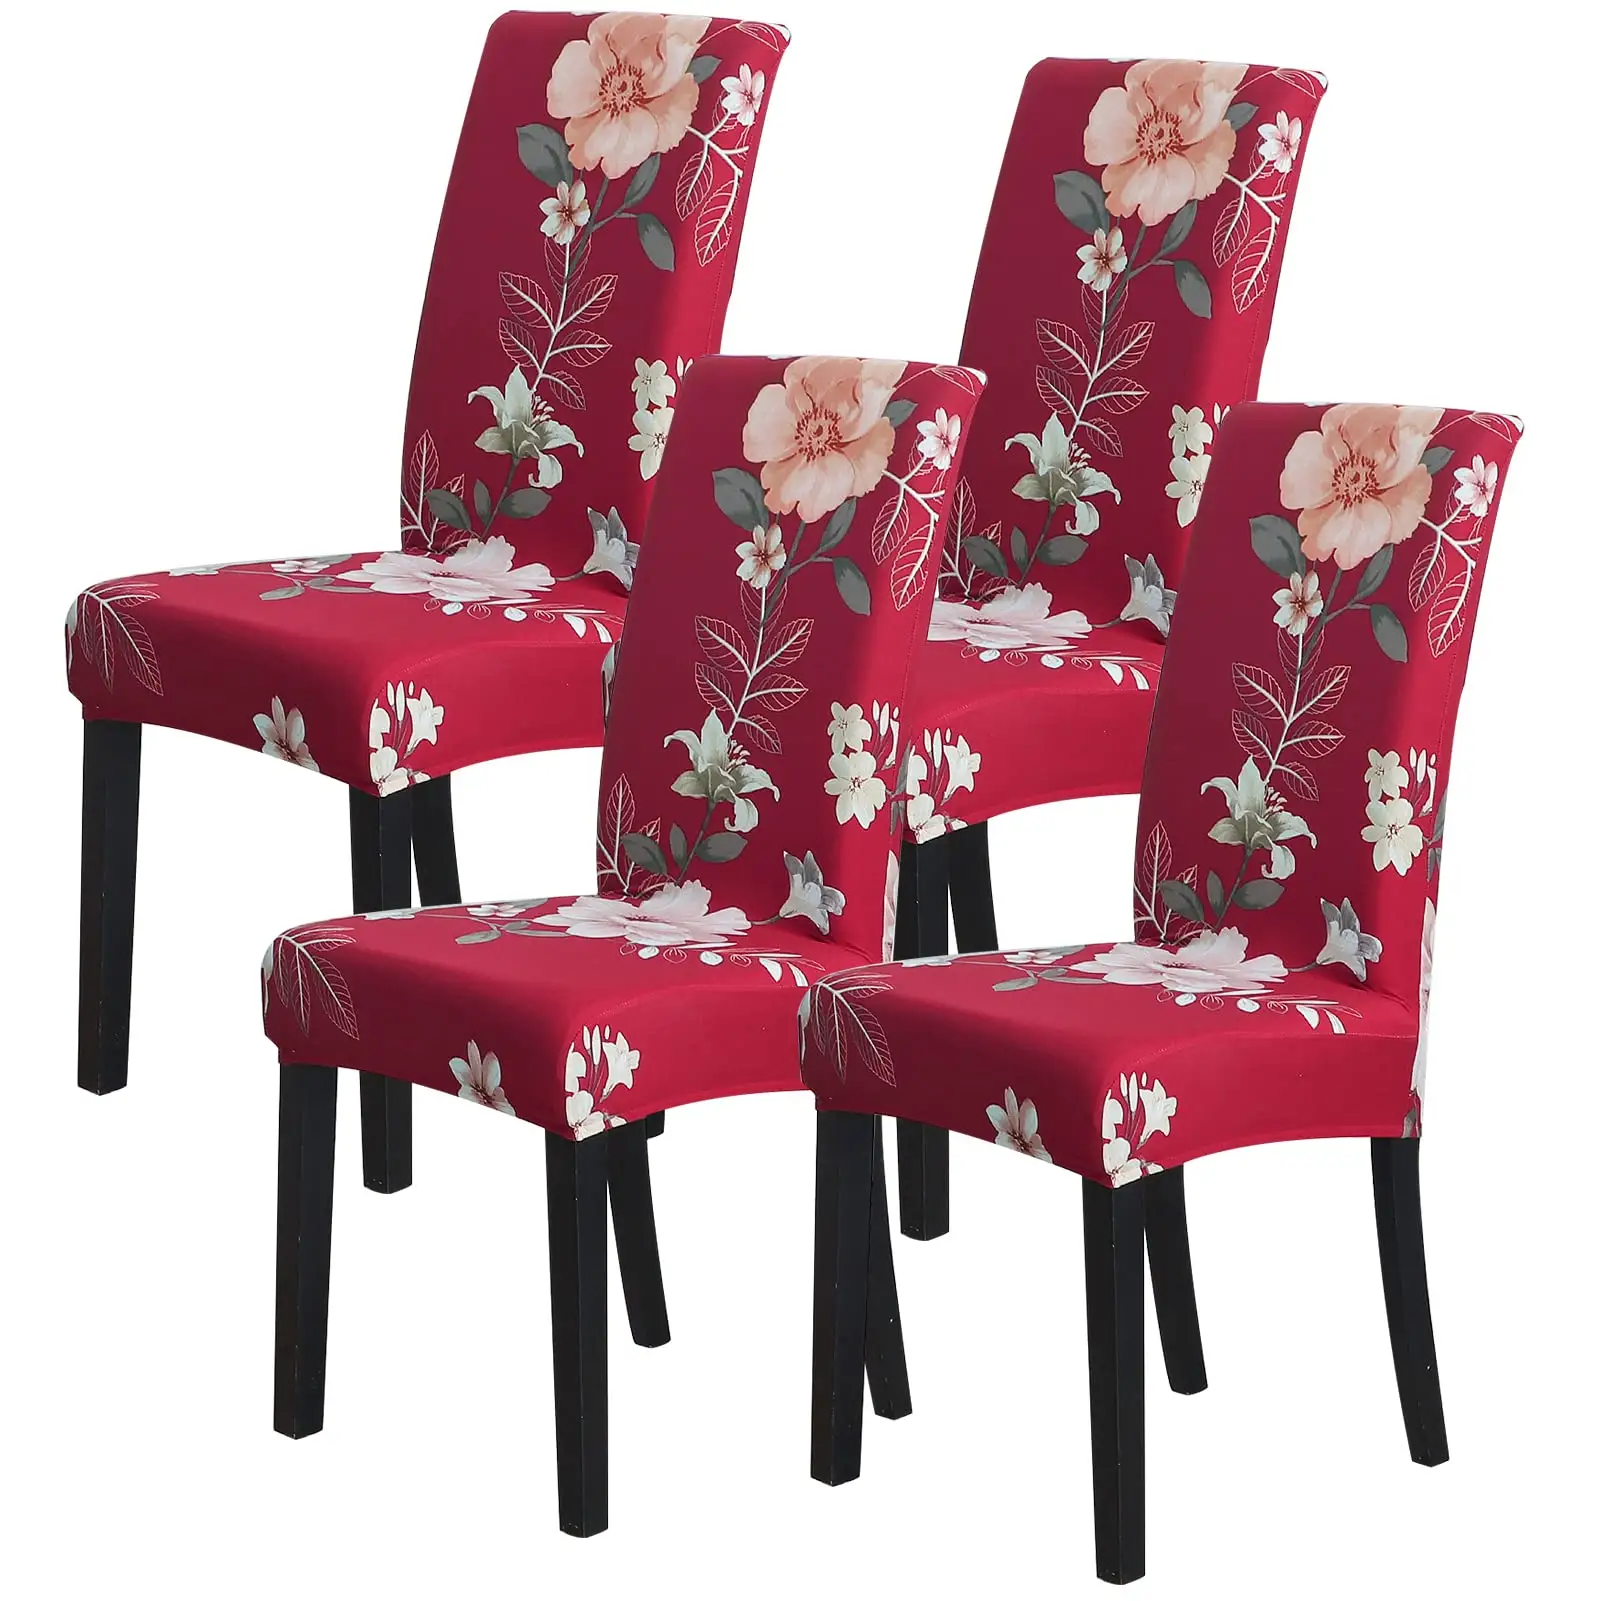 Amazon Chair Covers for Dining Room with Printed Patterns, Easy Slip-on Stretchy Dining Room Chair Covers Washable Dining Cha